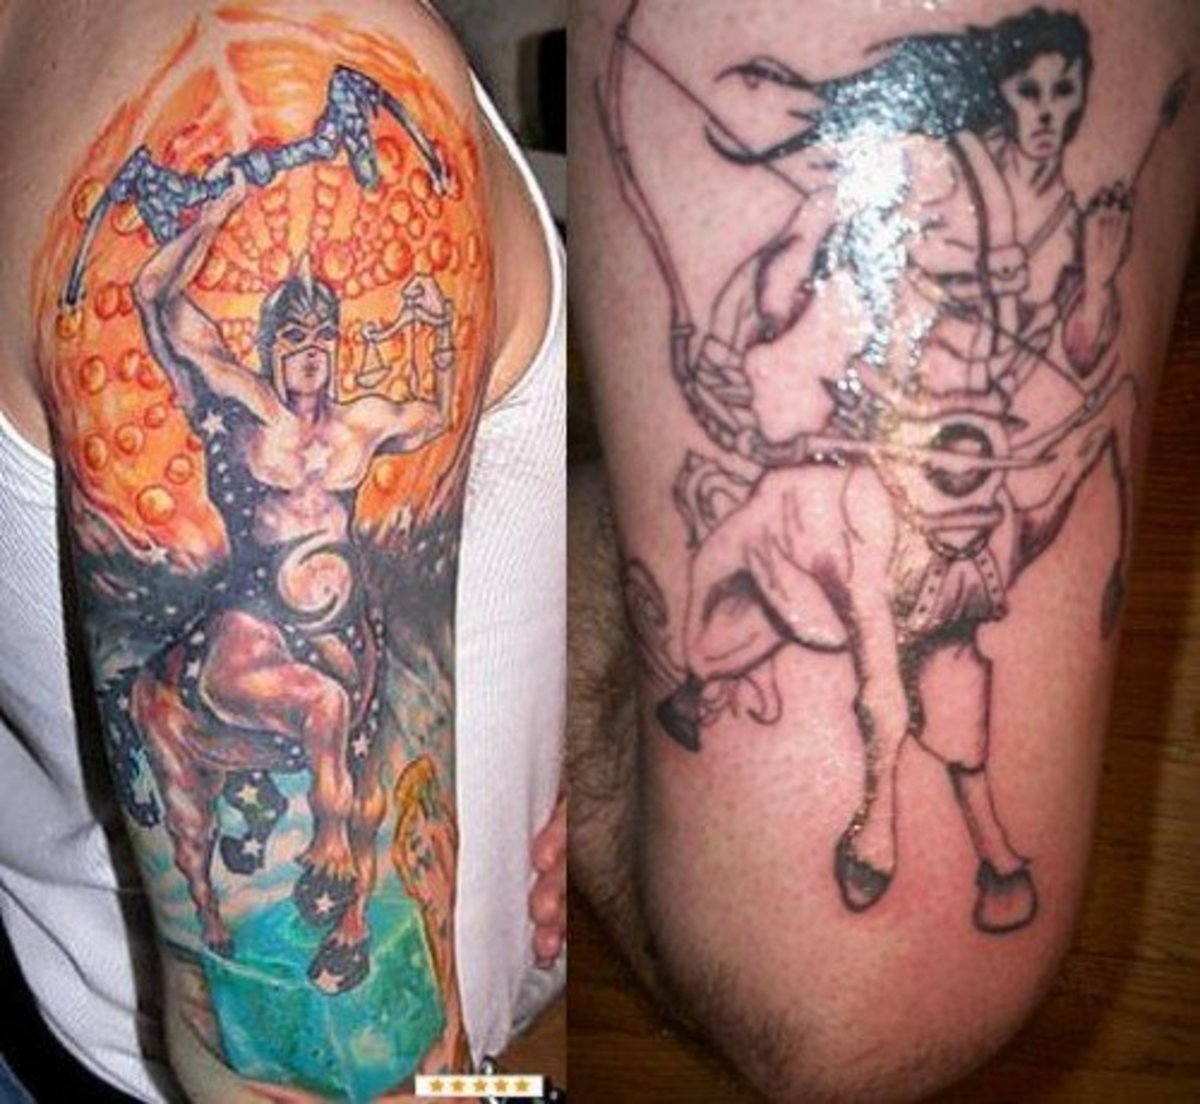 A full sleeve as compared to a simpler black centaur tattoo.